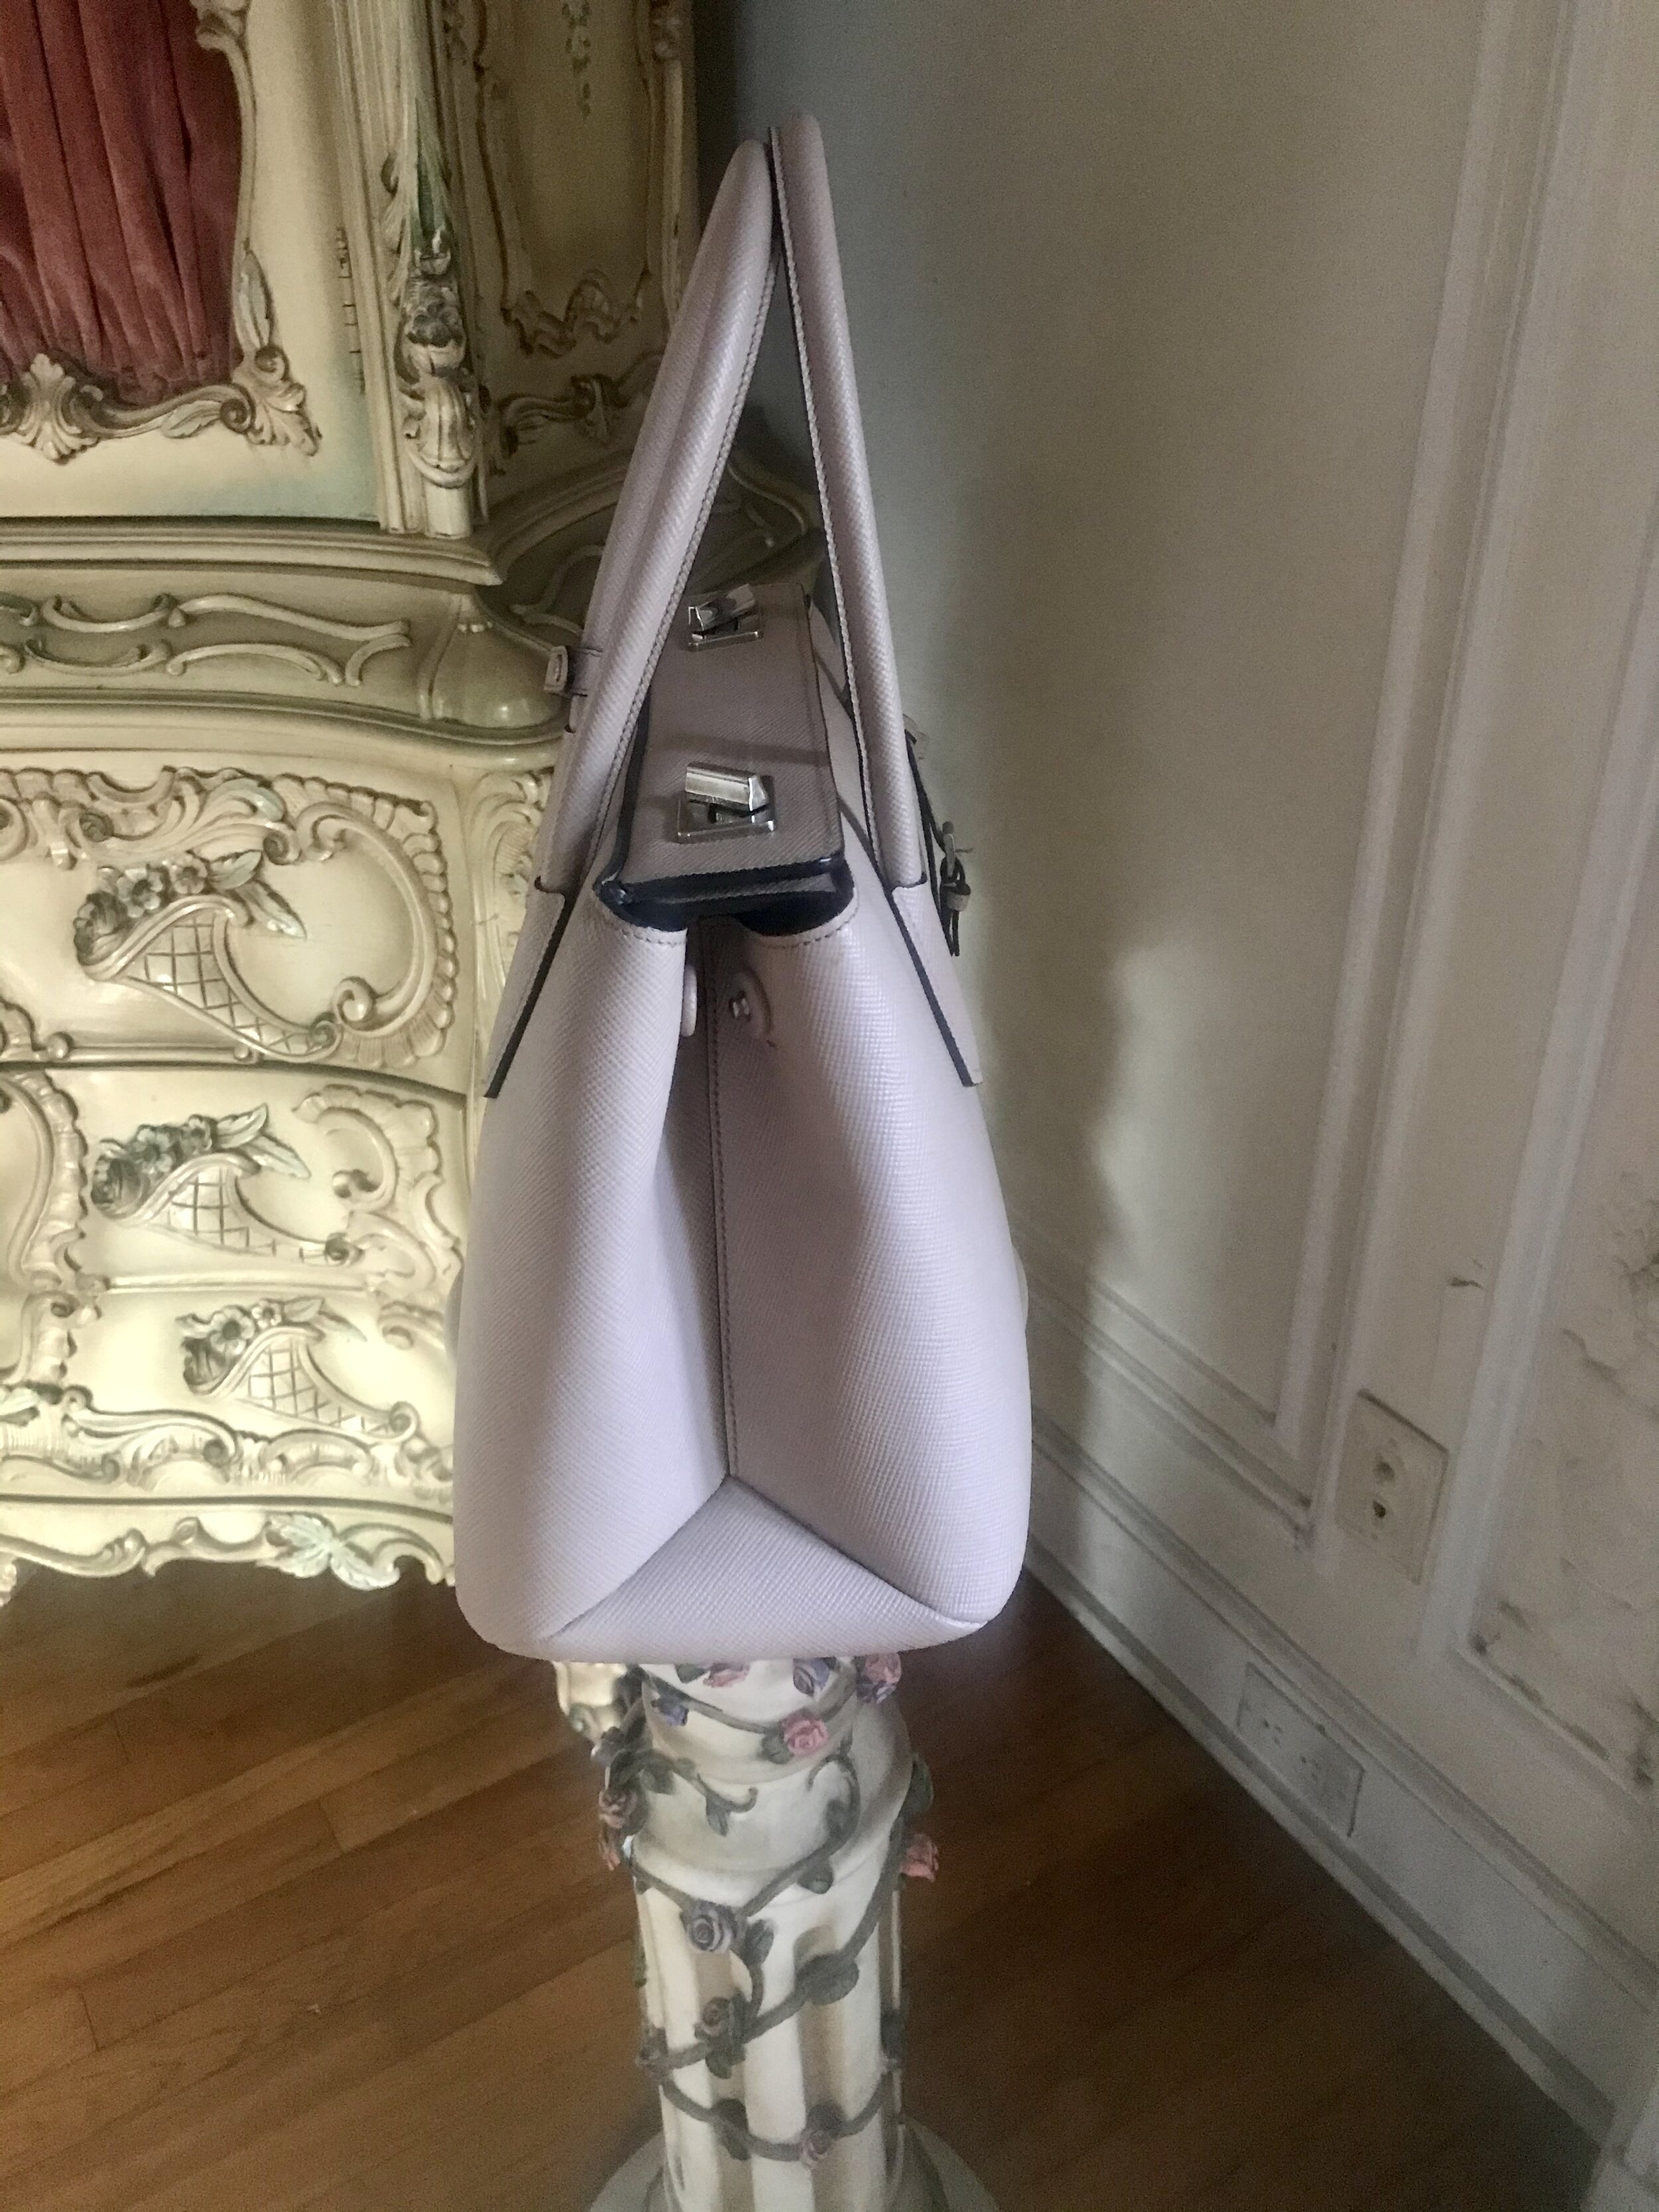 large saffiano cuir double tote